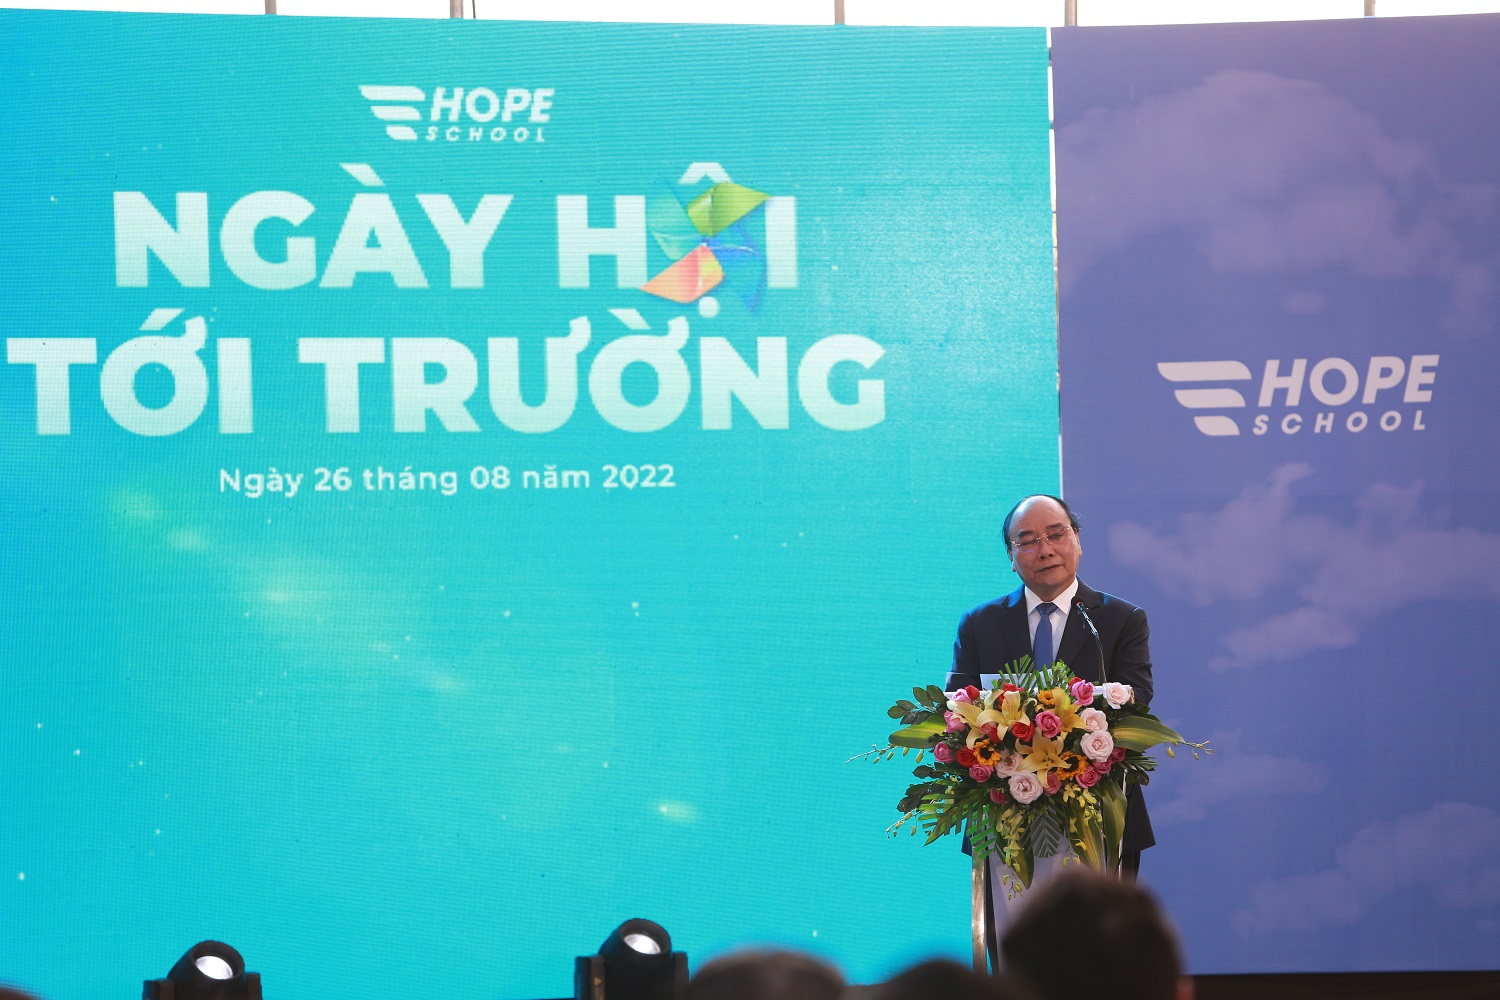 President Nguyen Xuan Phuc spoke at the Opening Ceremony